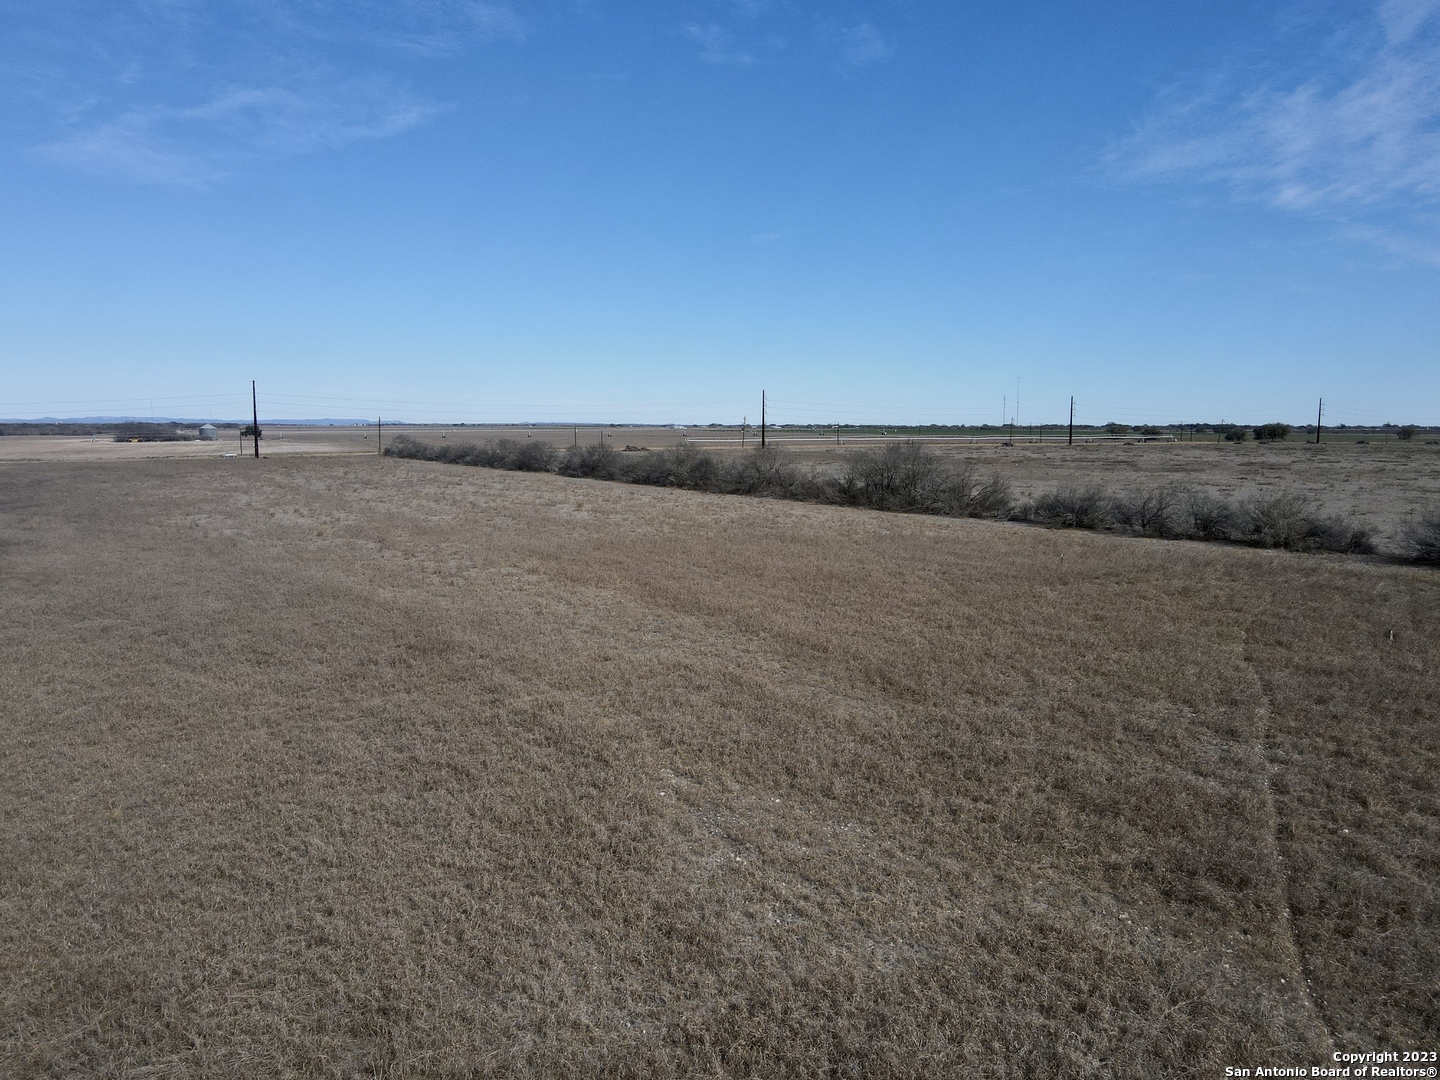 TBD TRACT I COUNTY ROAD 512, Dhanis, TX 78850